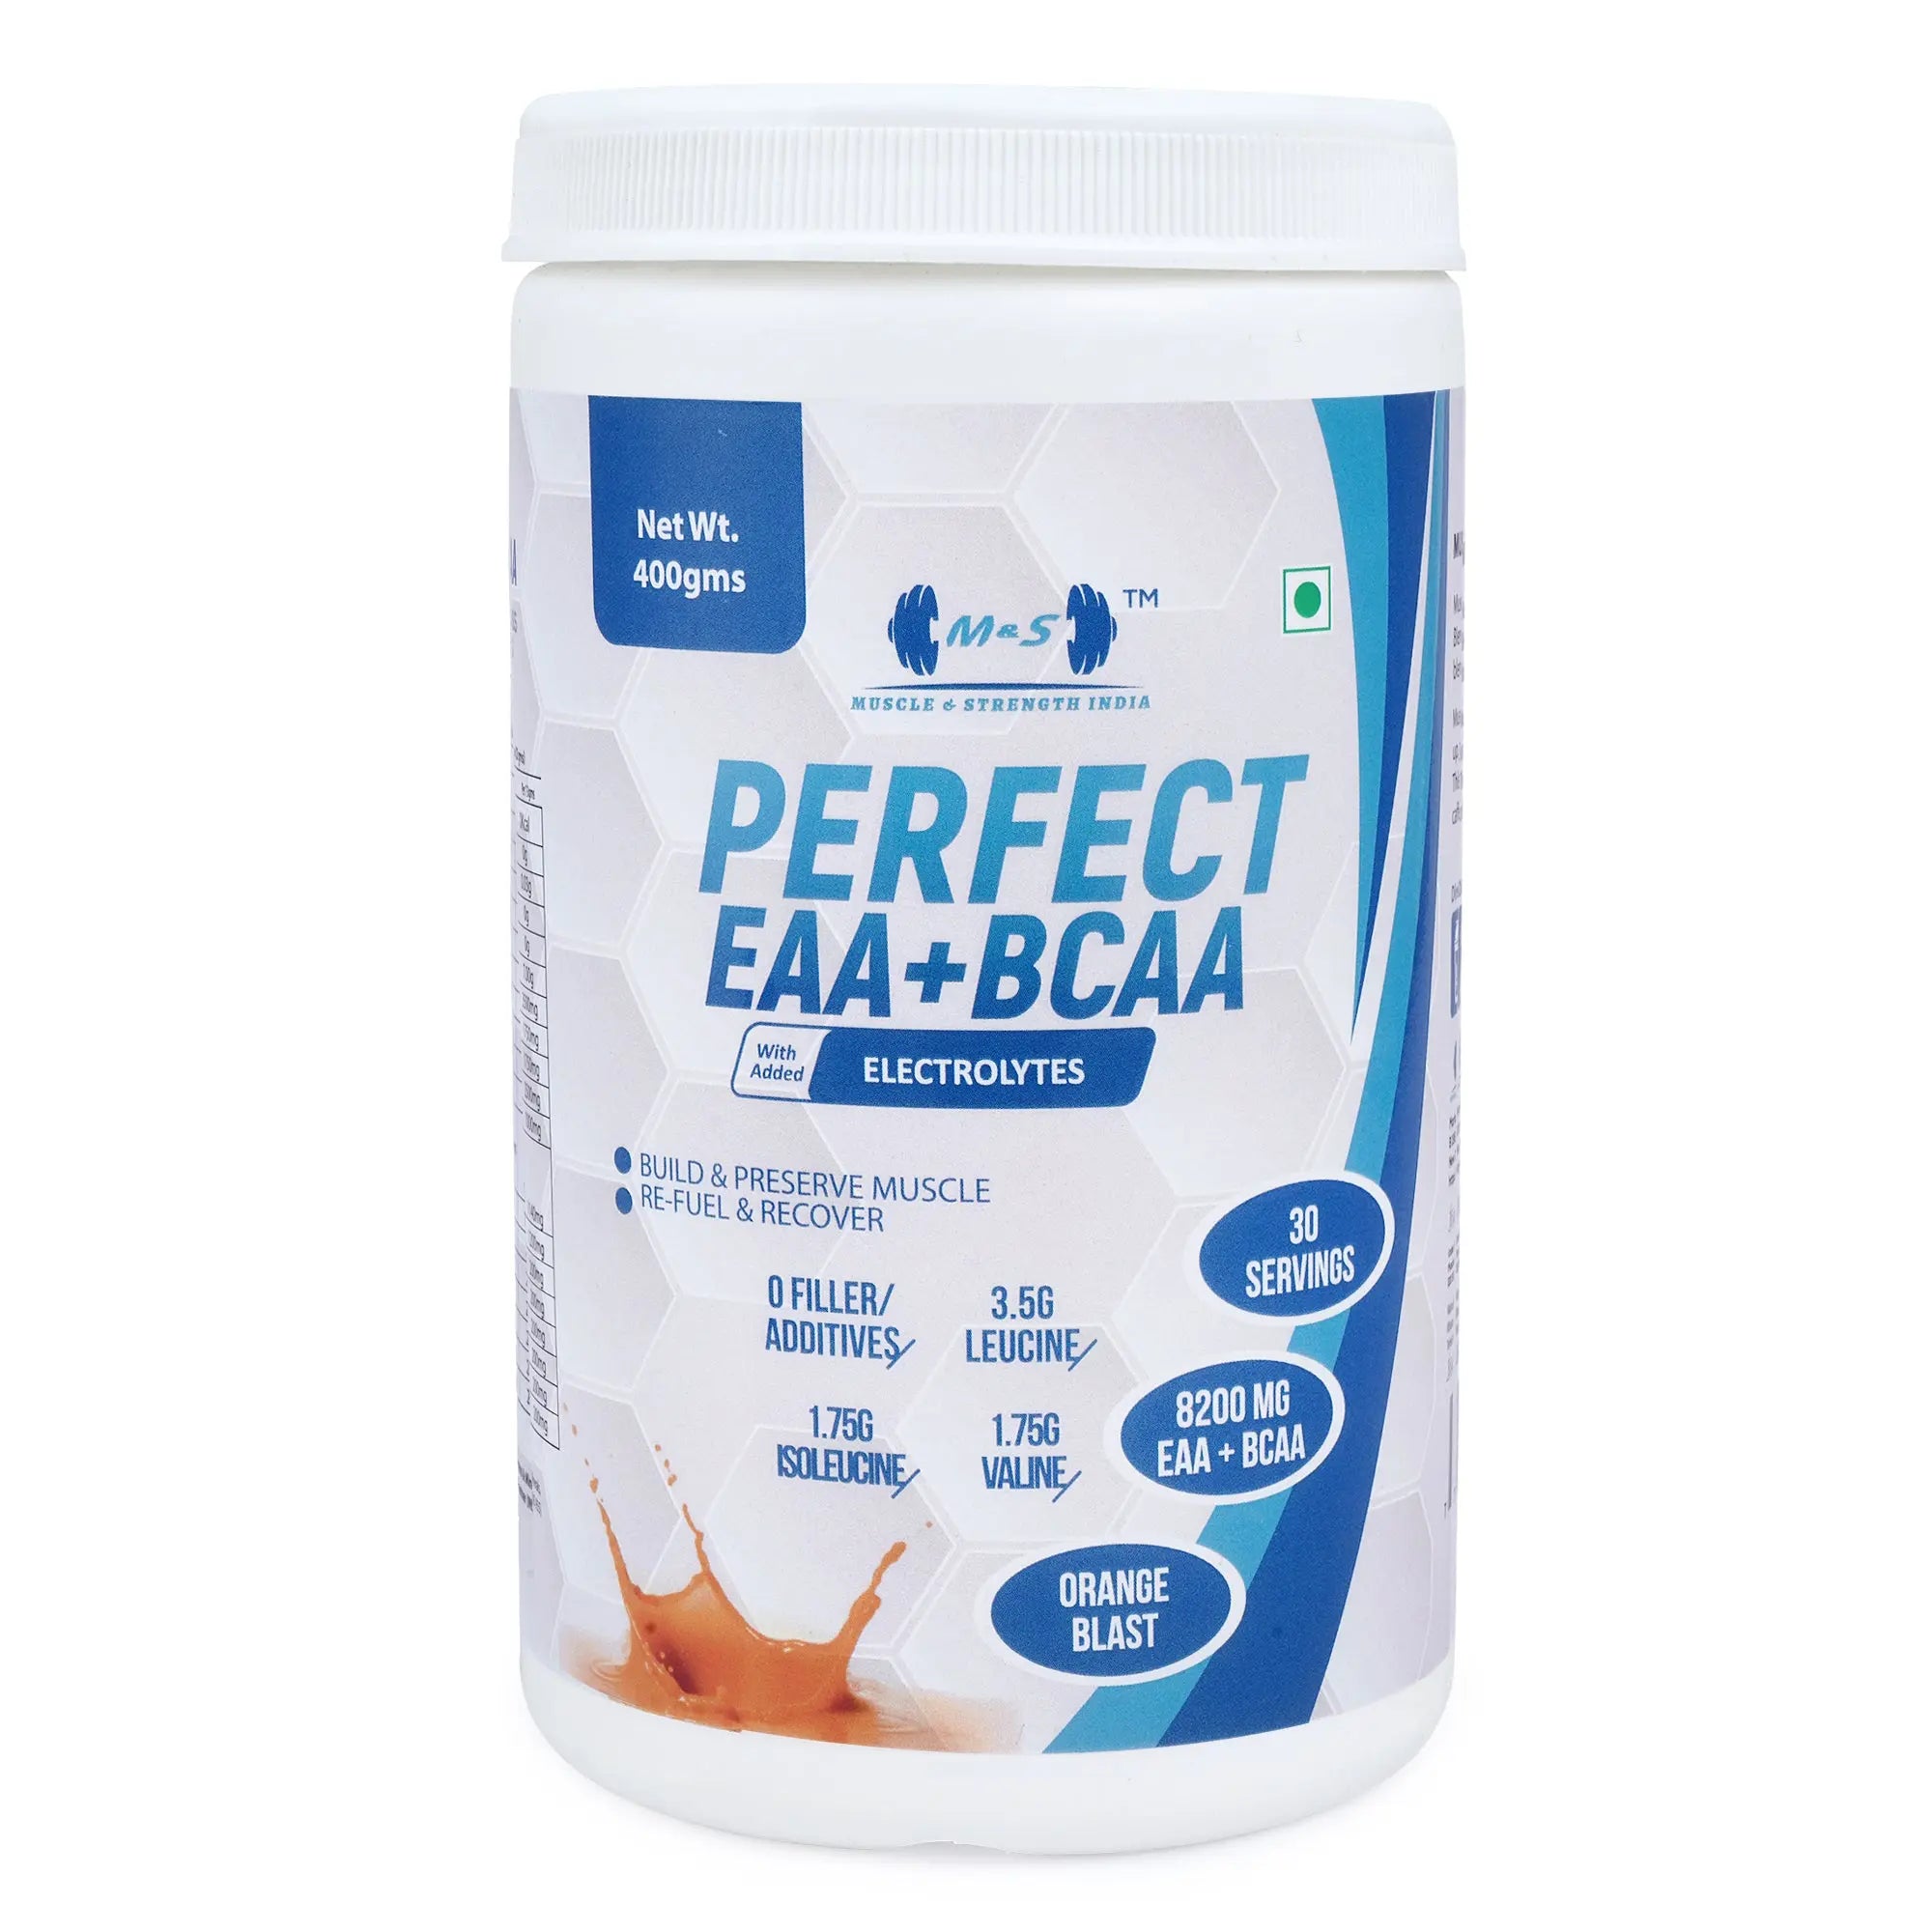 Muscle & Strength India Perfect EAA + BCAA | India's Leading